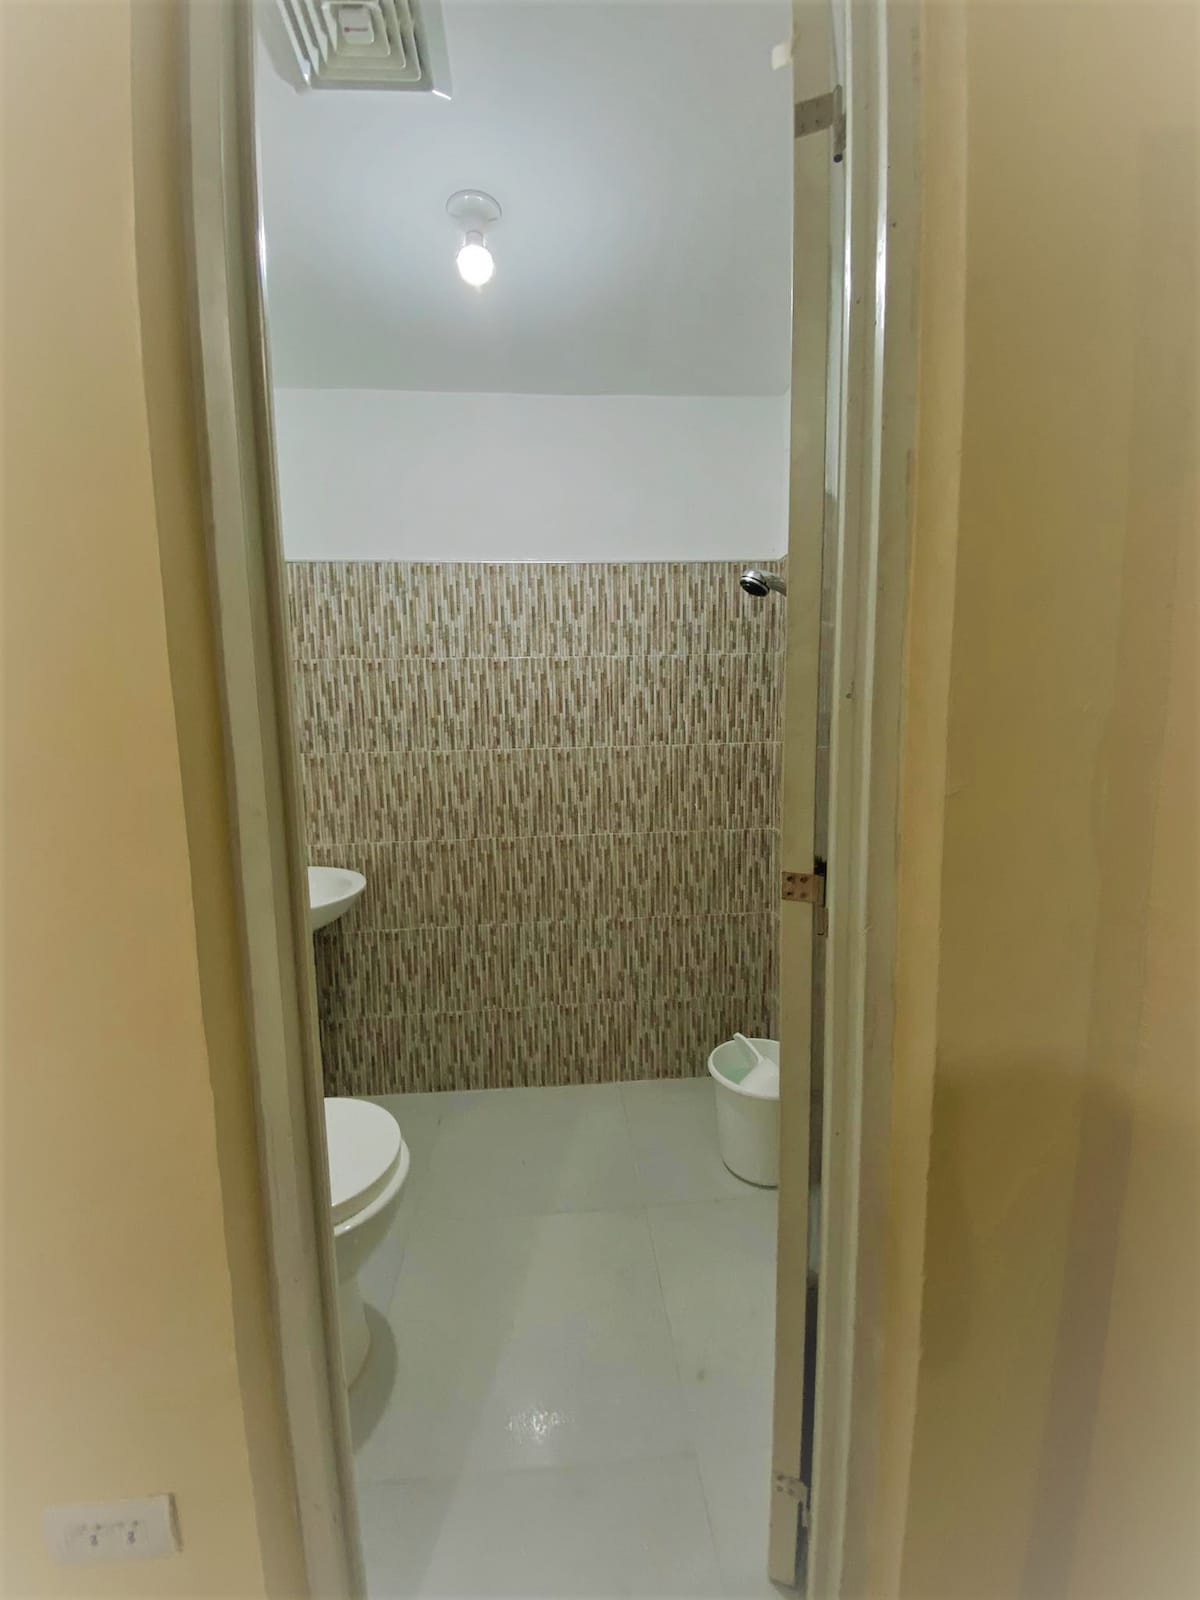 Qam-in Transient House (1 BR Apt. - RM 4)